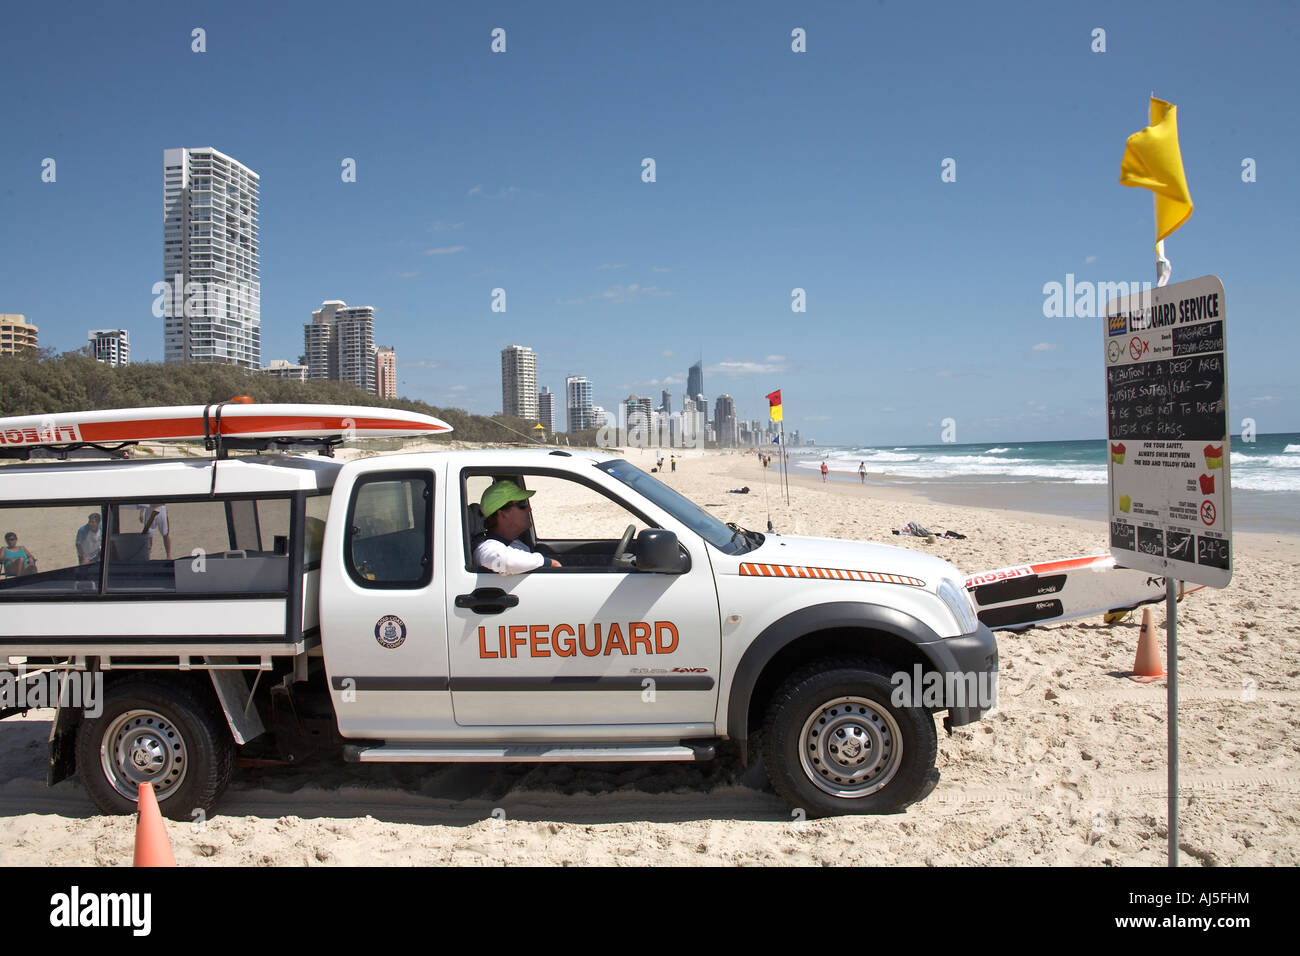 Lifeguard in ute pick up truck on the beach with warning notice in Surfers Paradise Queensland QLD Australia Stock Photo